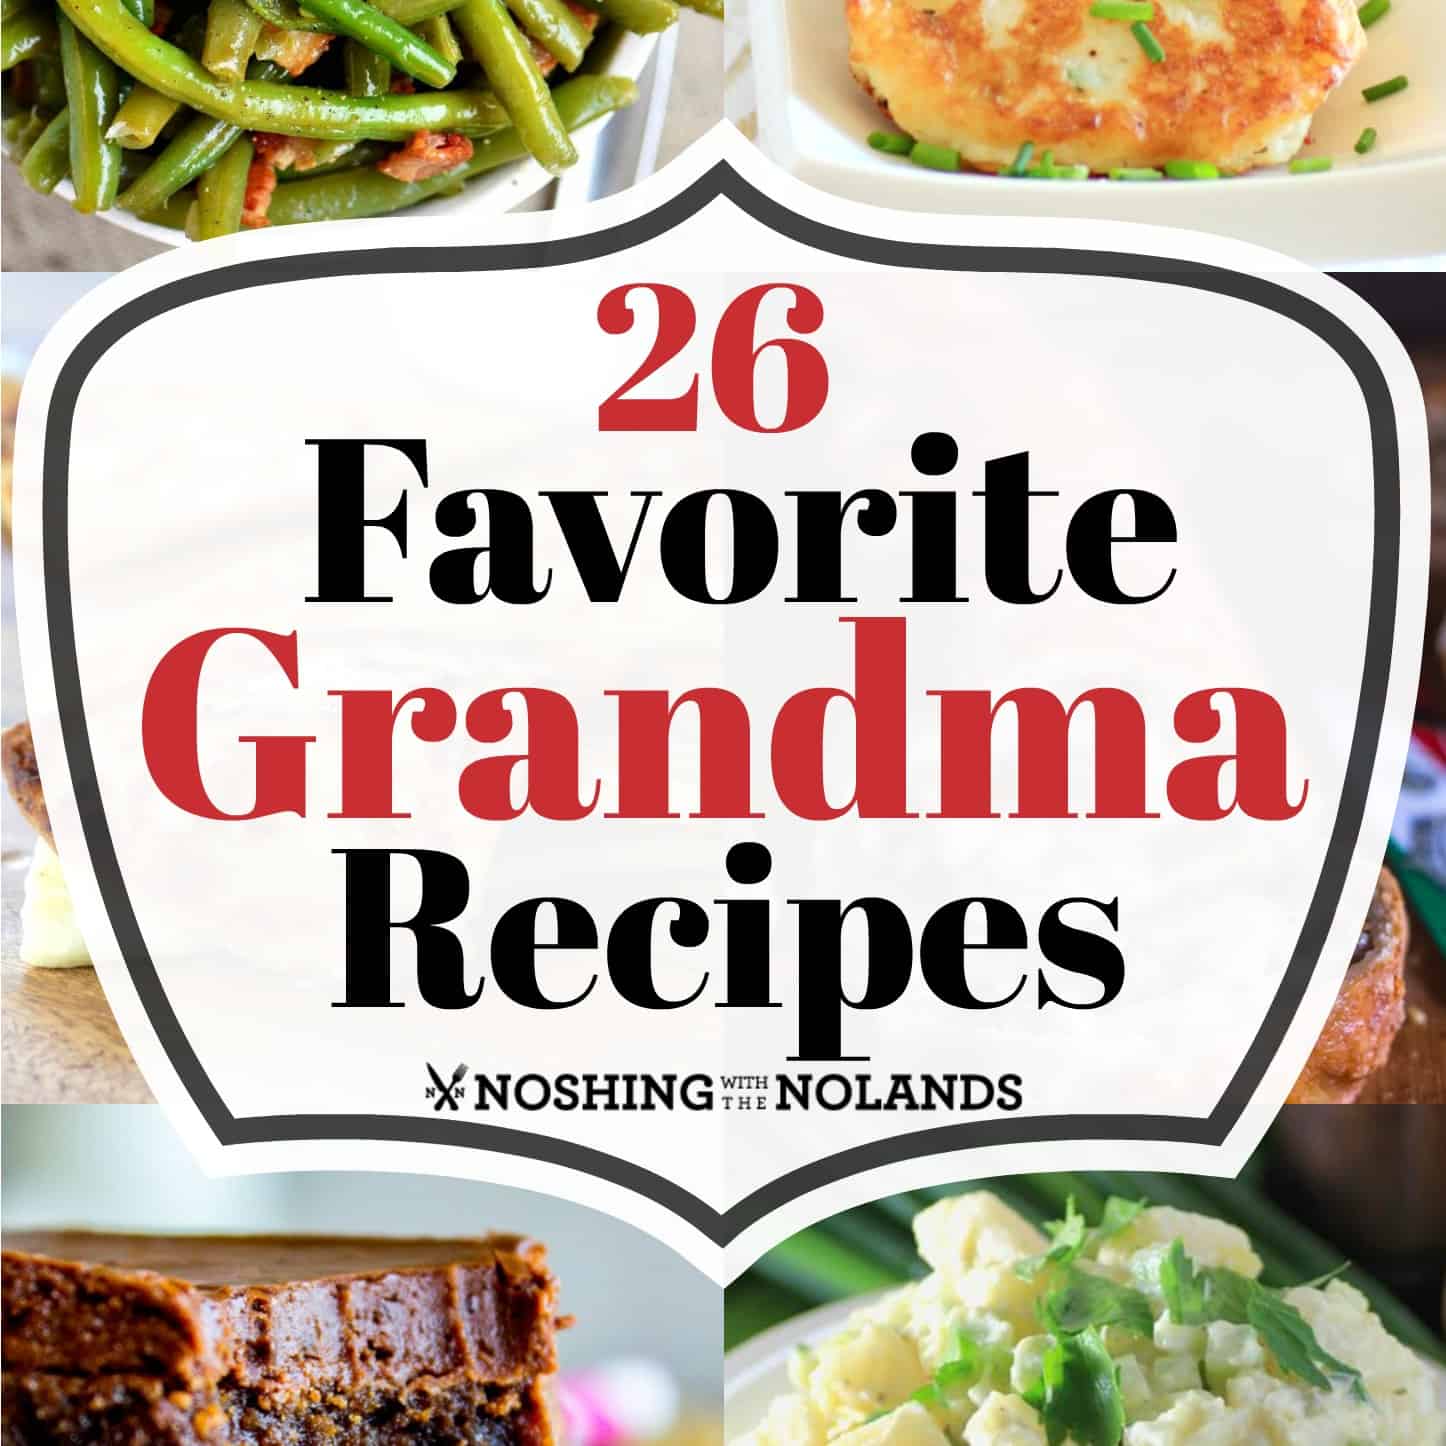 26 Favorite Grandma Recipes from around the world for you to enjoy